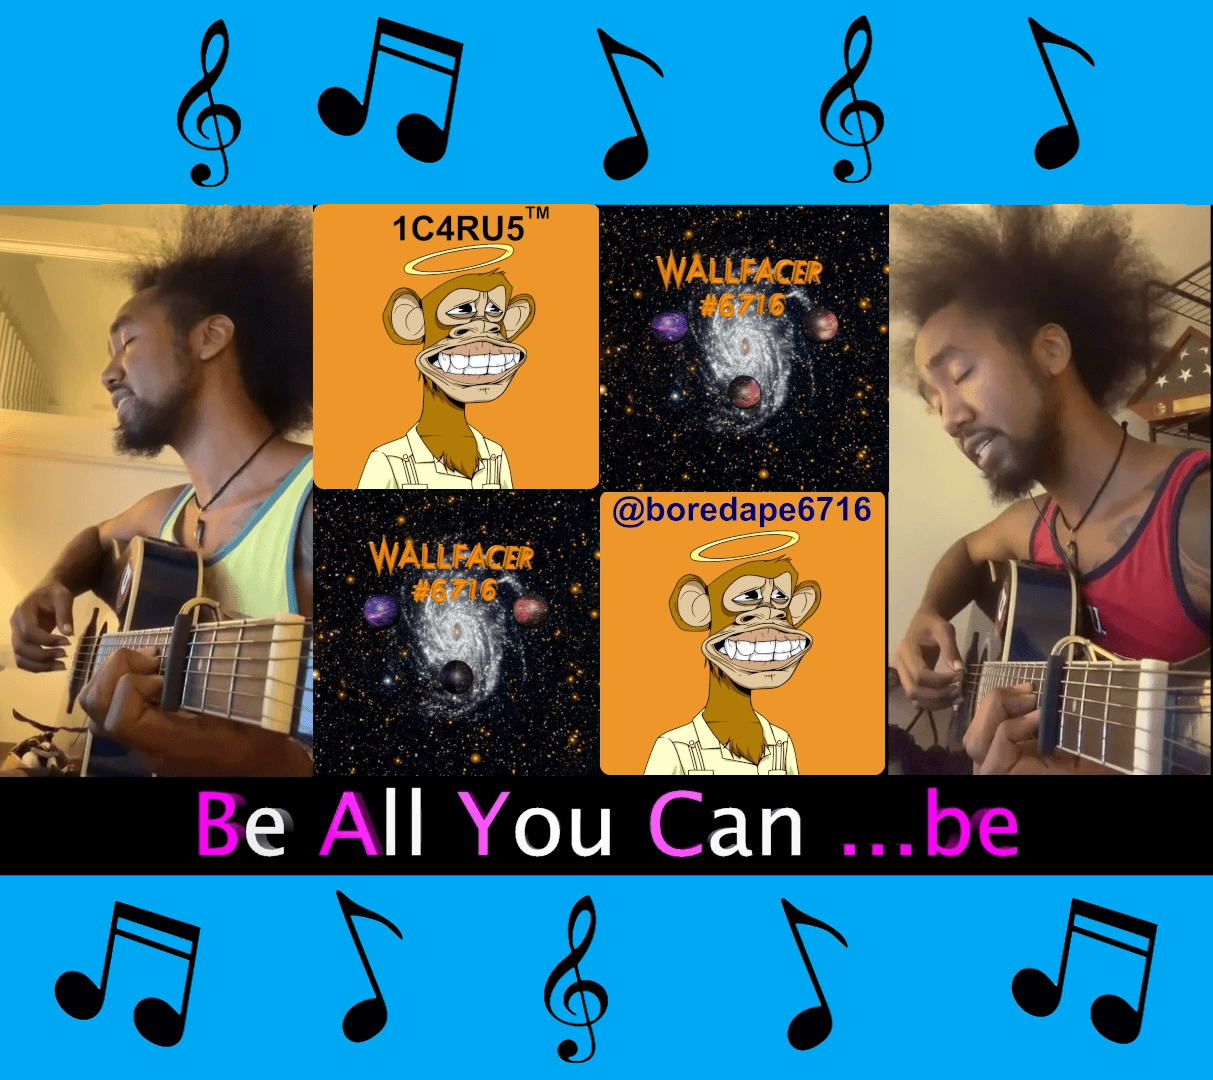 B.A.Y.C. (Be All You Can) Premiere NFT Music Video by 1C4RU5 (icarus, Tyrone Post)